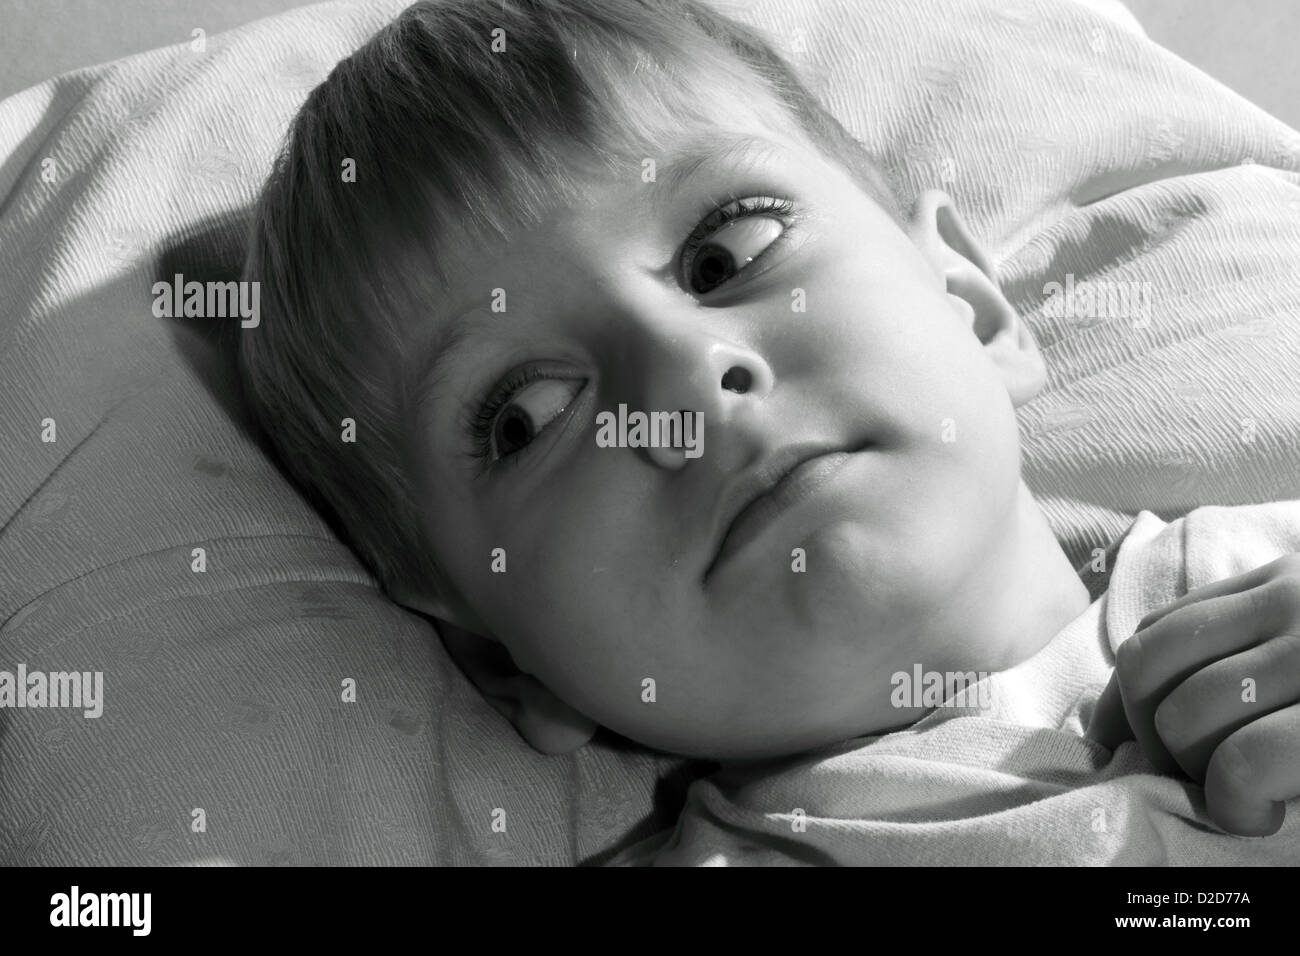 boy lying on a bed, black and white Stock Photo